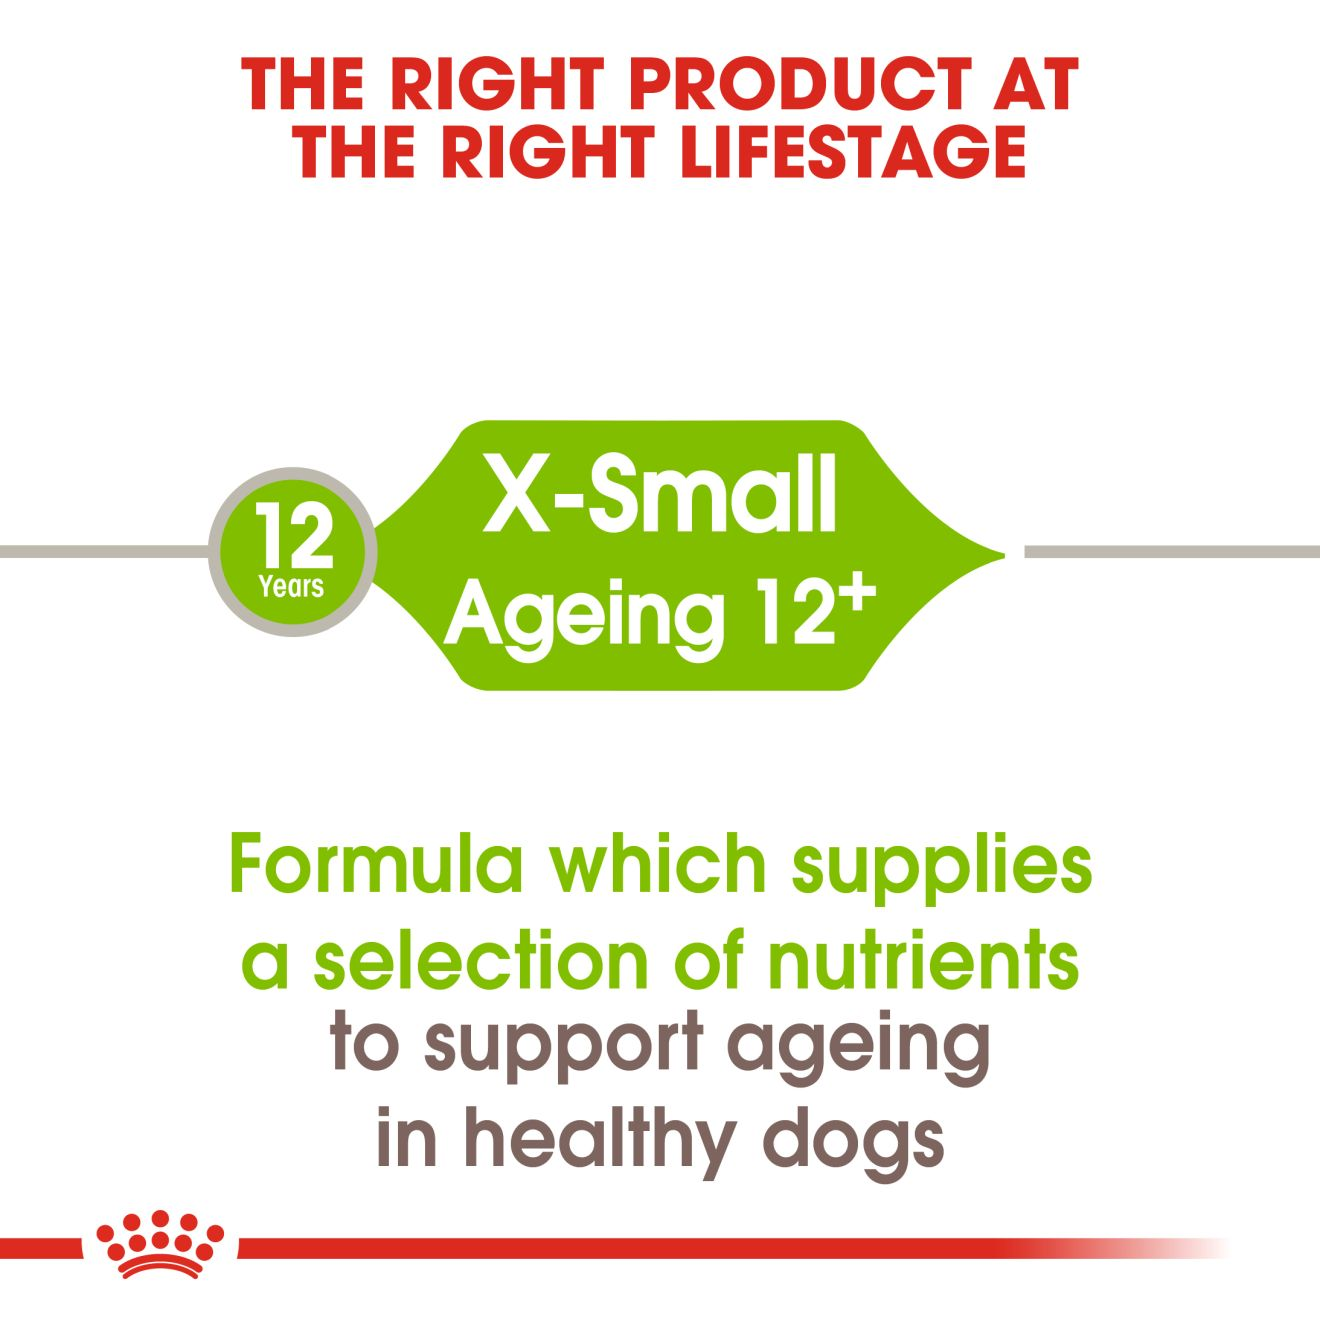 X-Small Ageing 12+